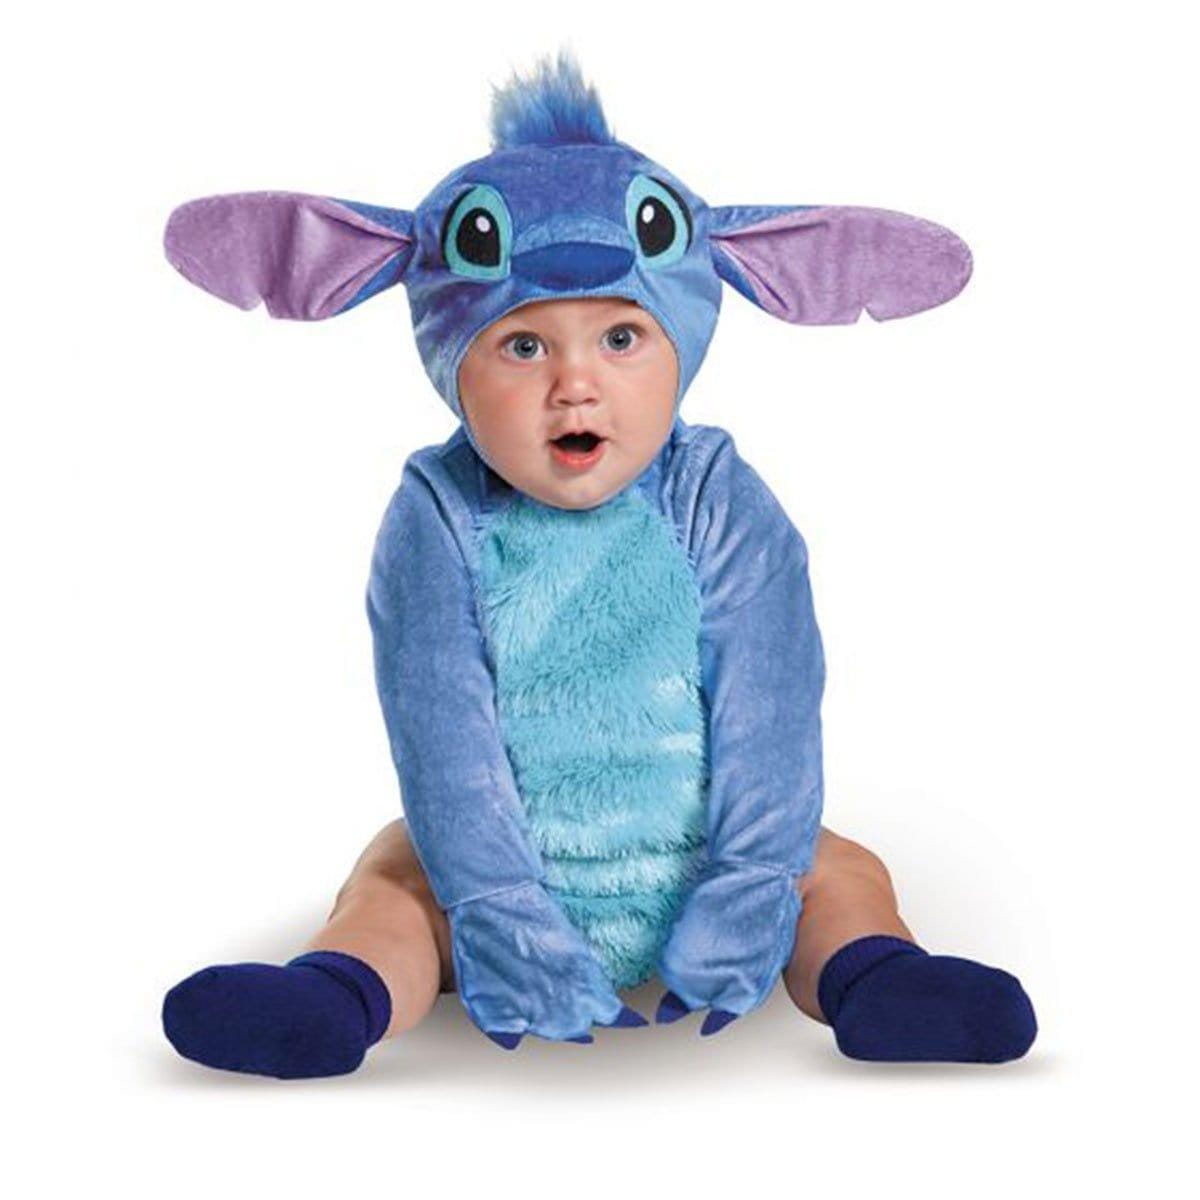 Buy Costumes Stitch Costume for Toddlers, Lilo & Stitch sold at Party Expert